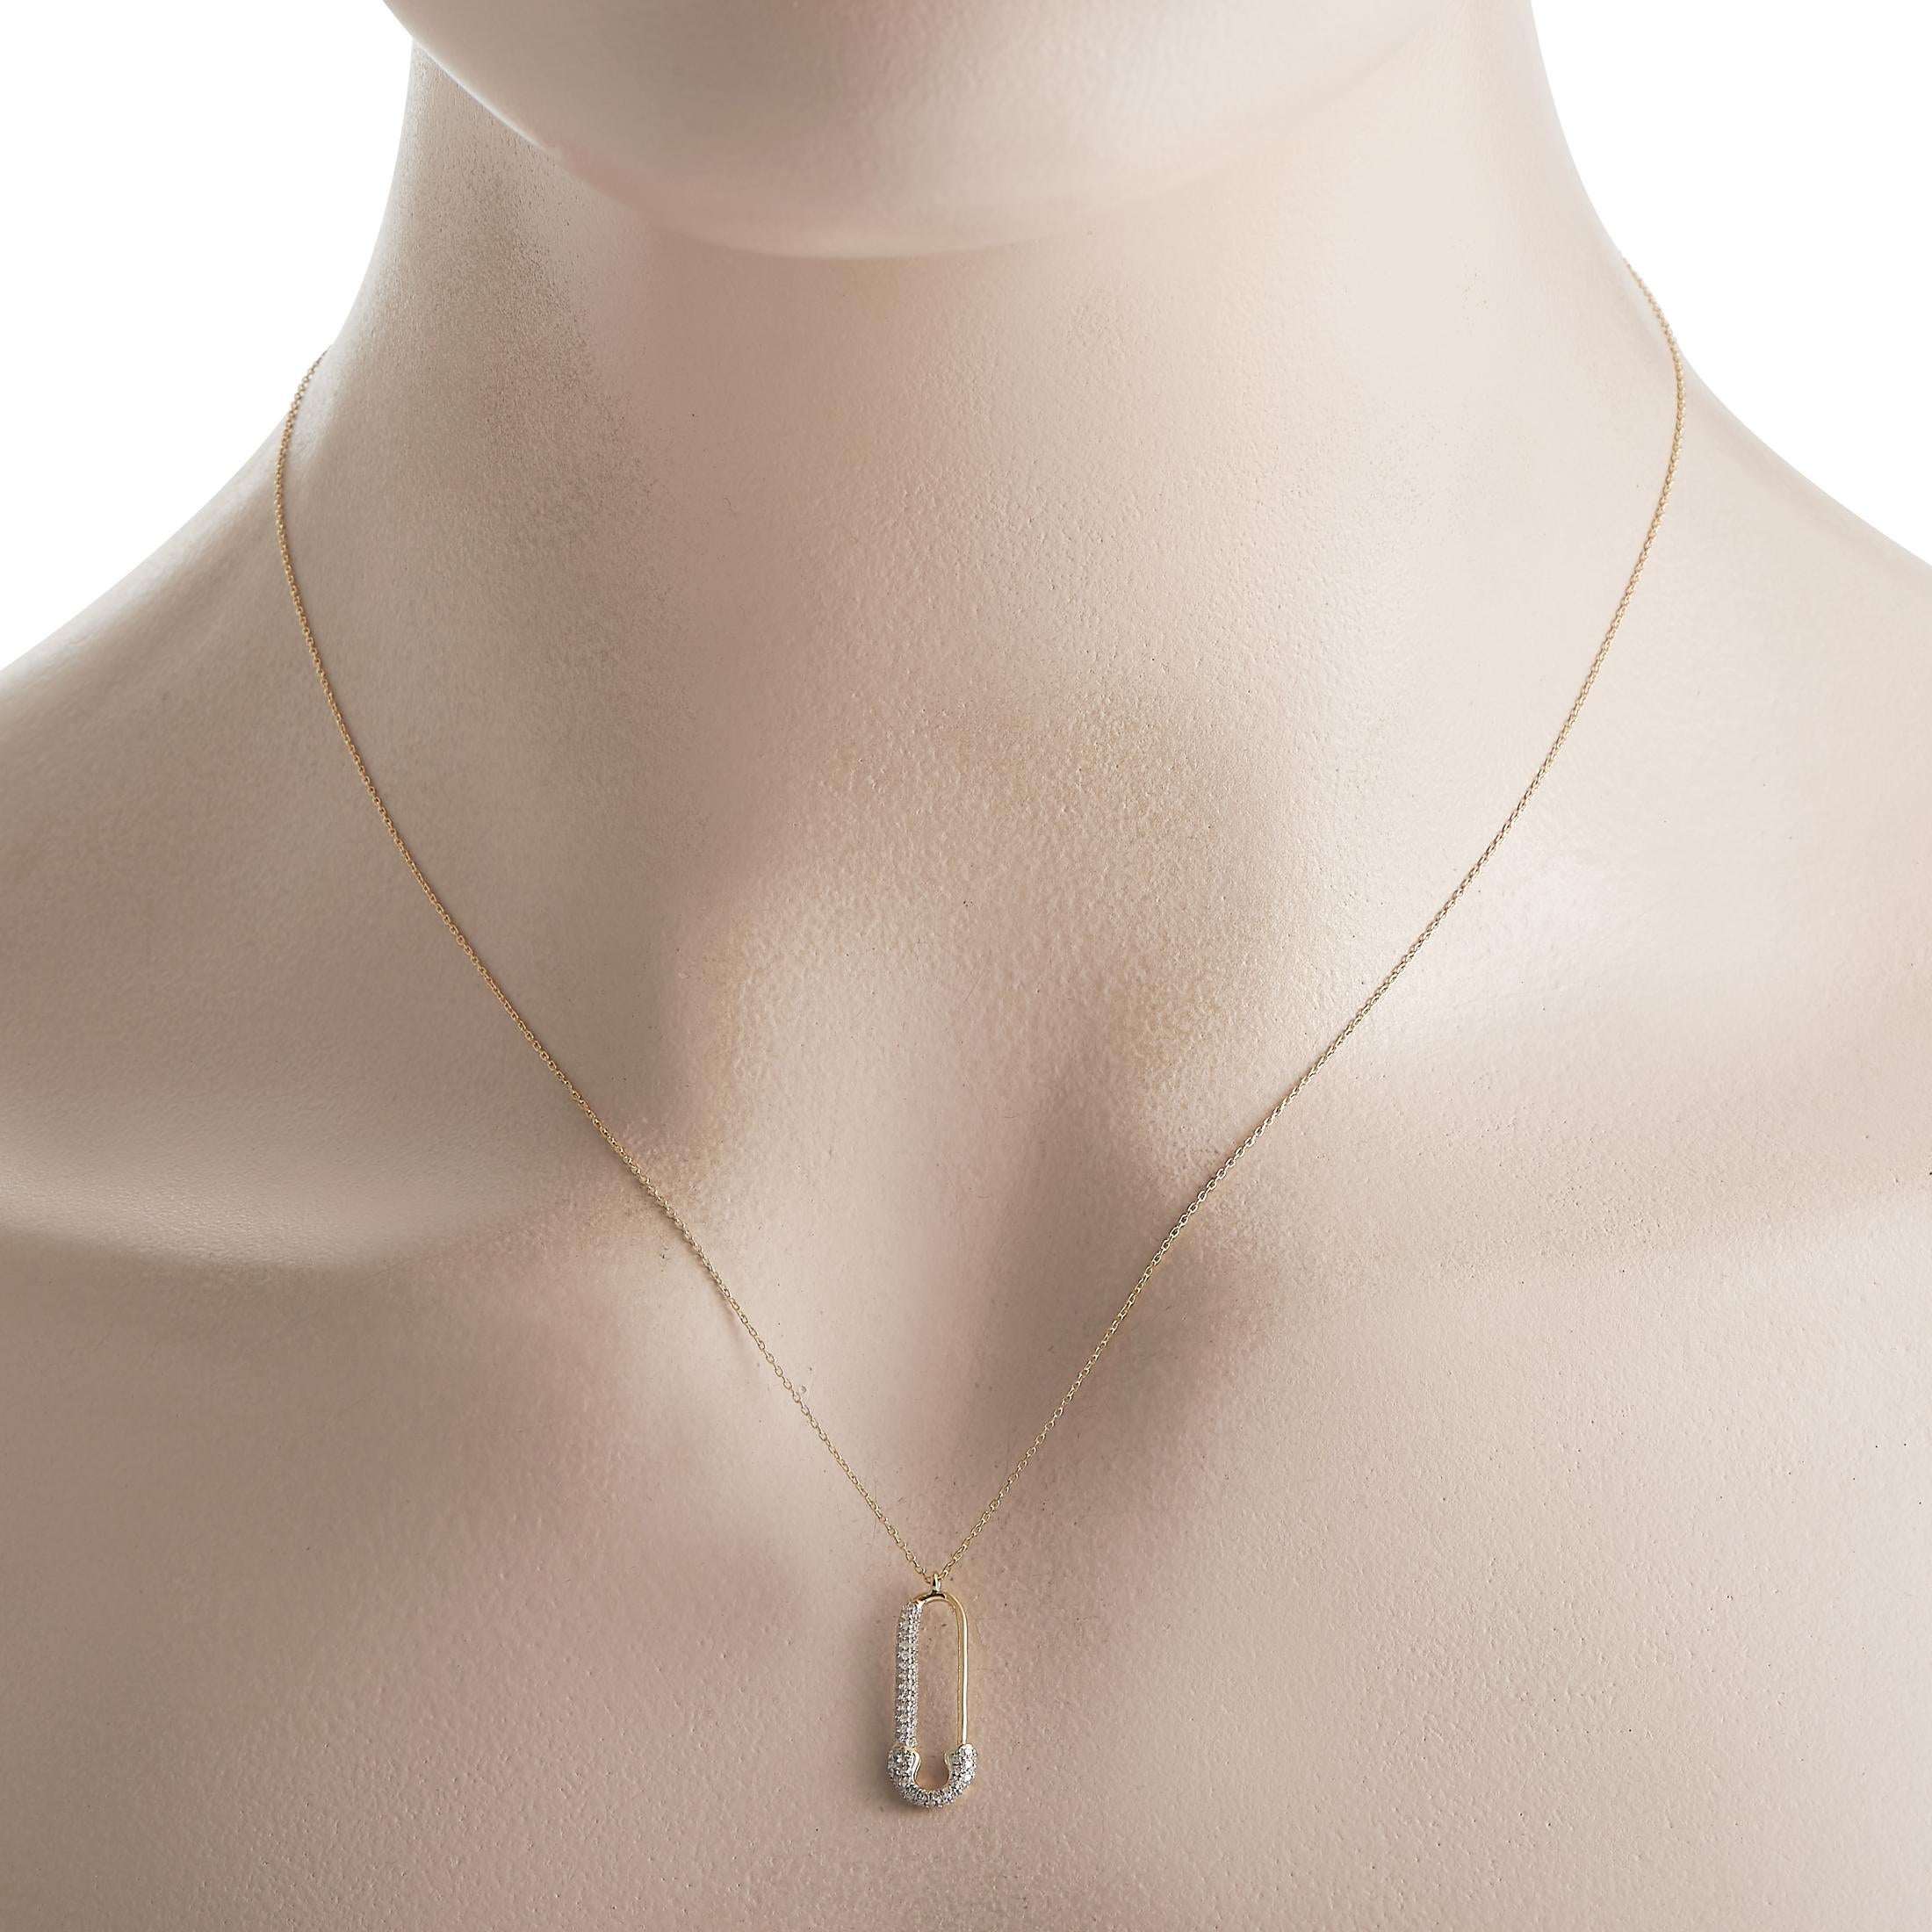 This luxurious necklace is simply unforgettable. Suspended from a delicate 18 chain, youll find a charming safety pin pendant measuring 0.75 long by 0.13 wide  its also elevated by inset diamond accents with a total weight of 0.17 carats.This